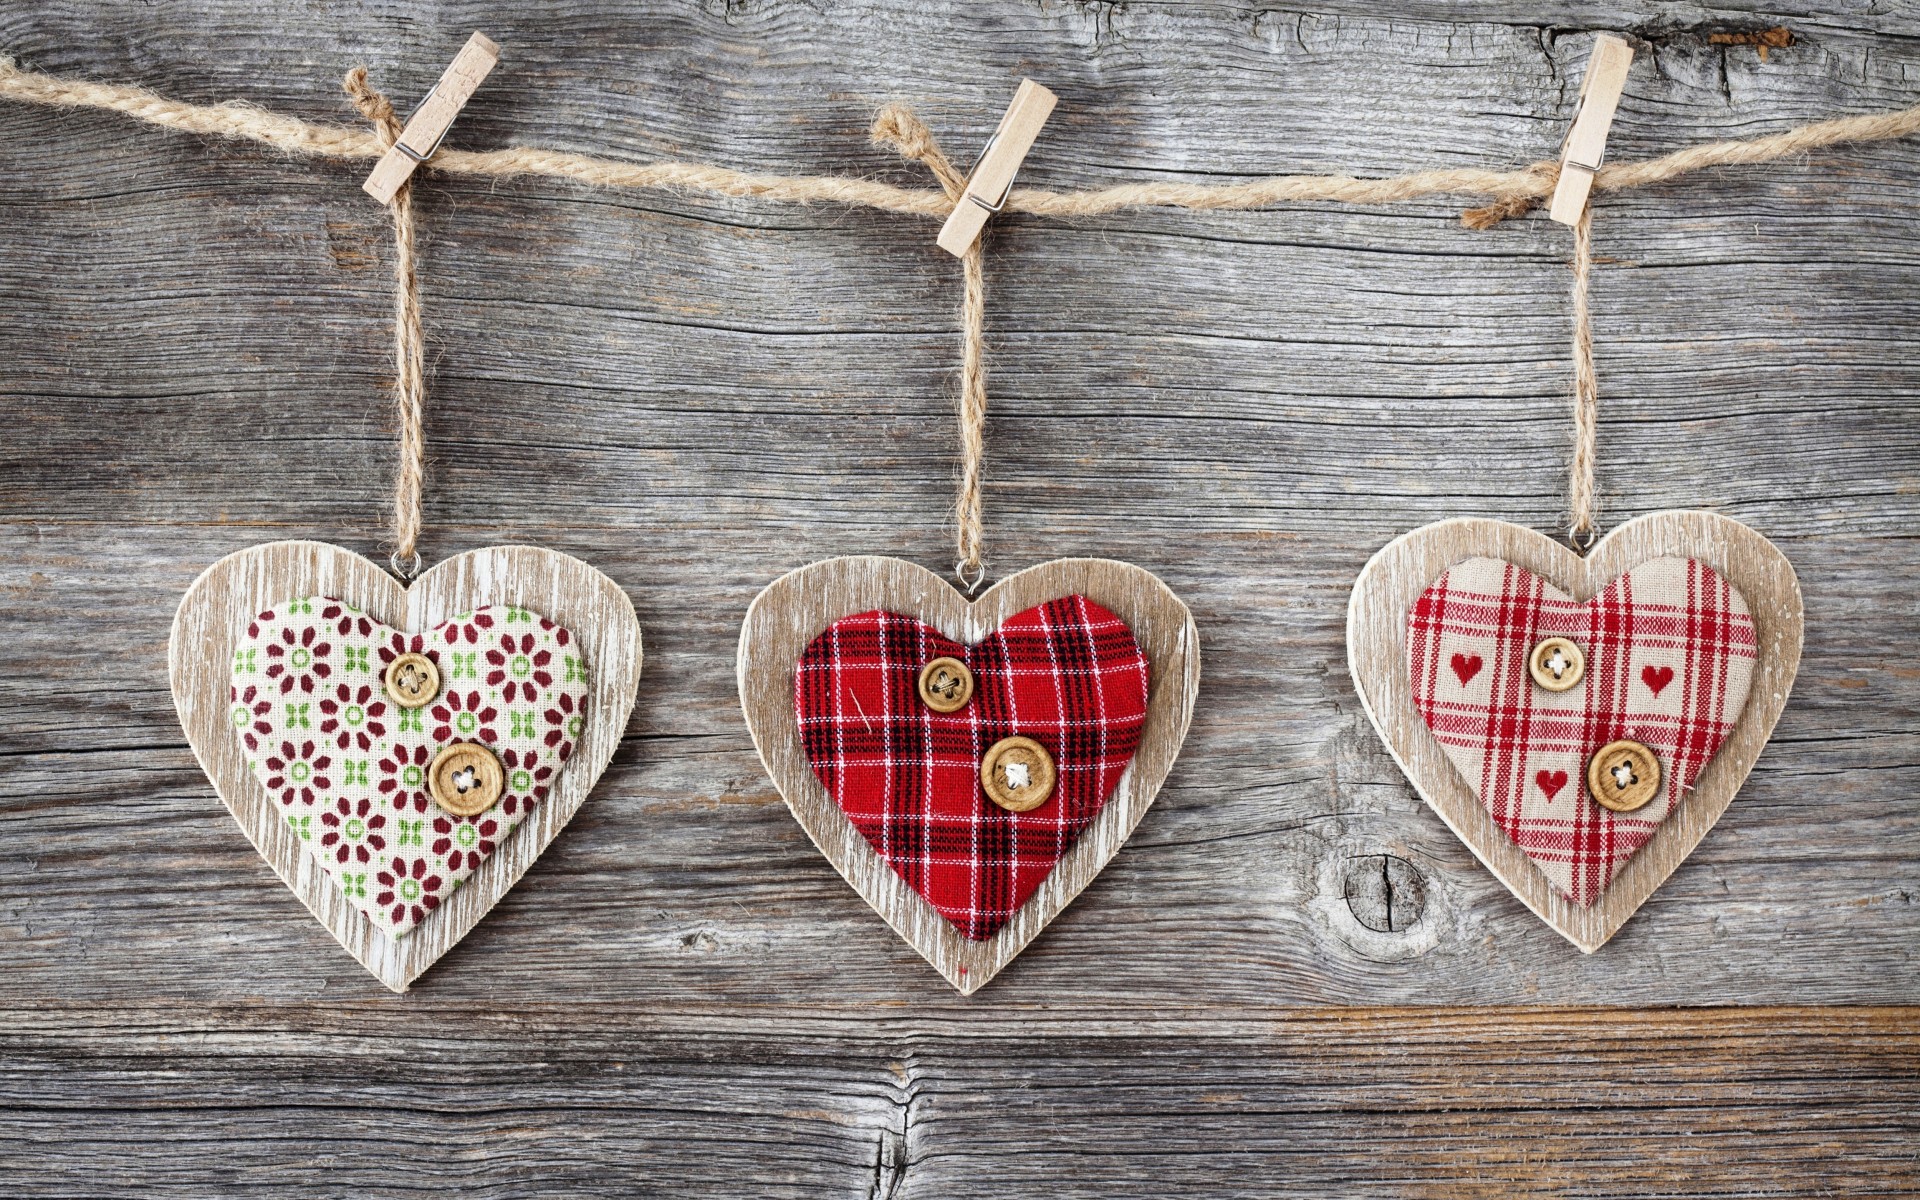 heart, Hearts, Wood, Fabric, Buttons, Clothespins, Rope, Love, Romance, Bokeh, Valentineand039s, Day Wallpaper